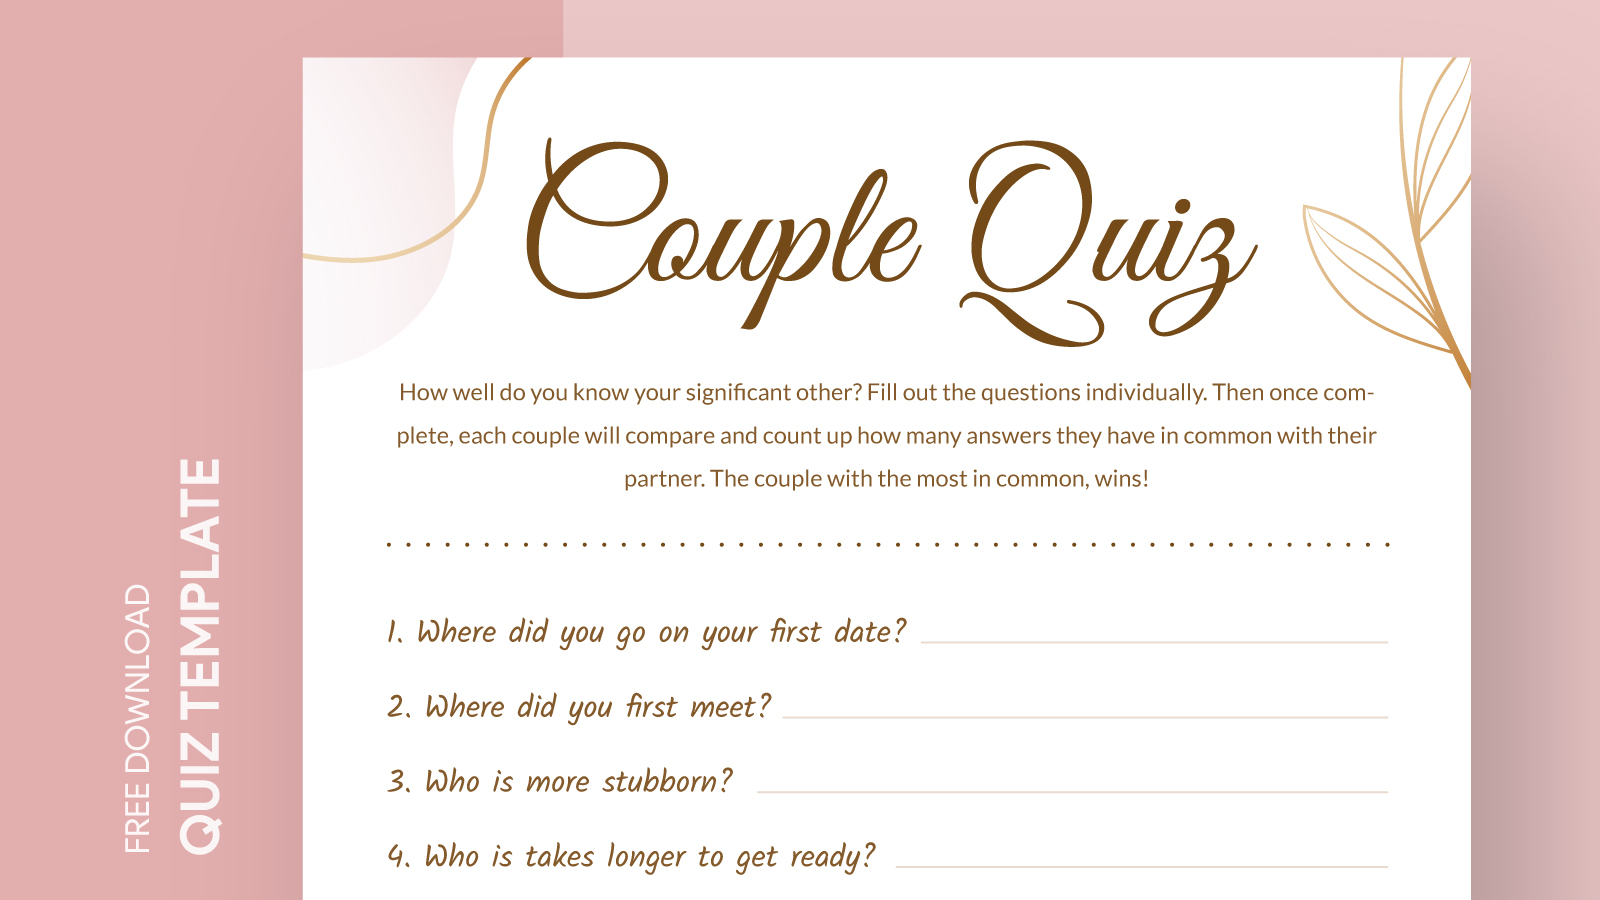 Couples Quiz: How Well Do You Know Your Partner?